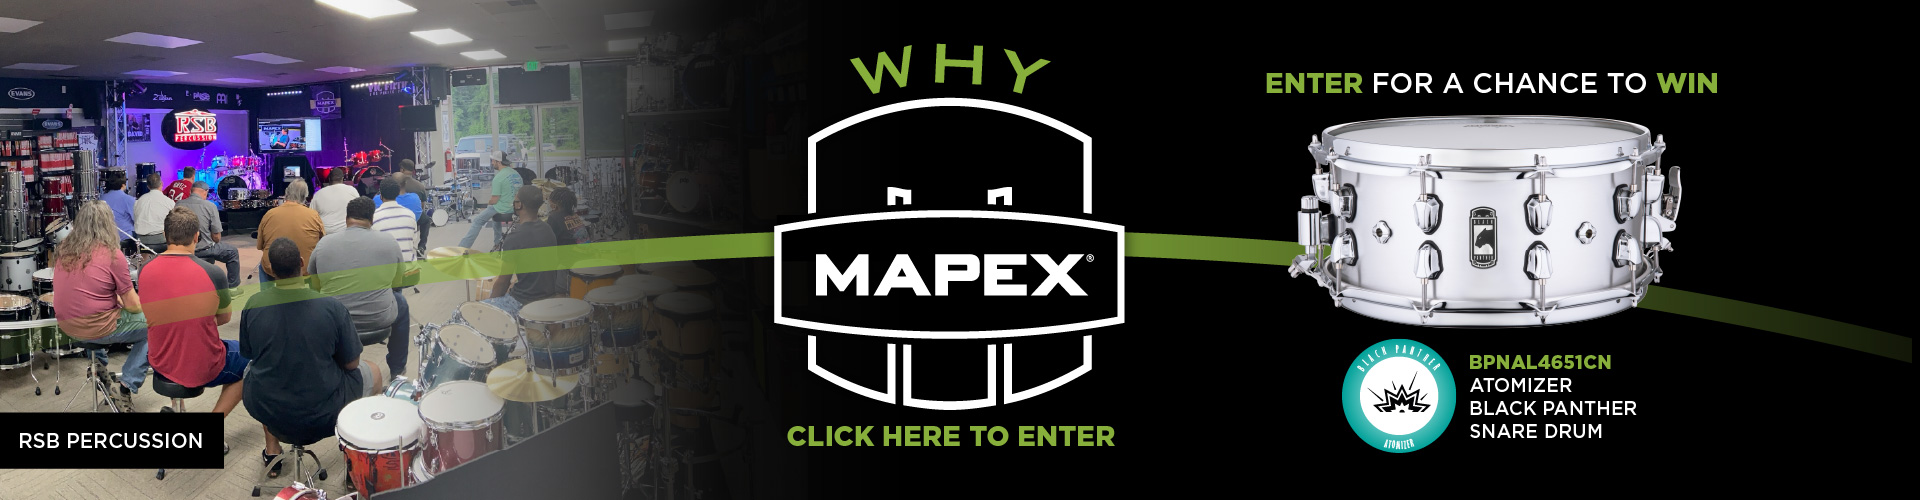 Why Mapex